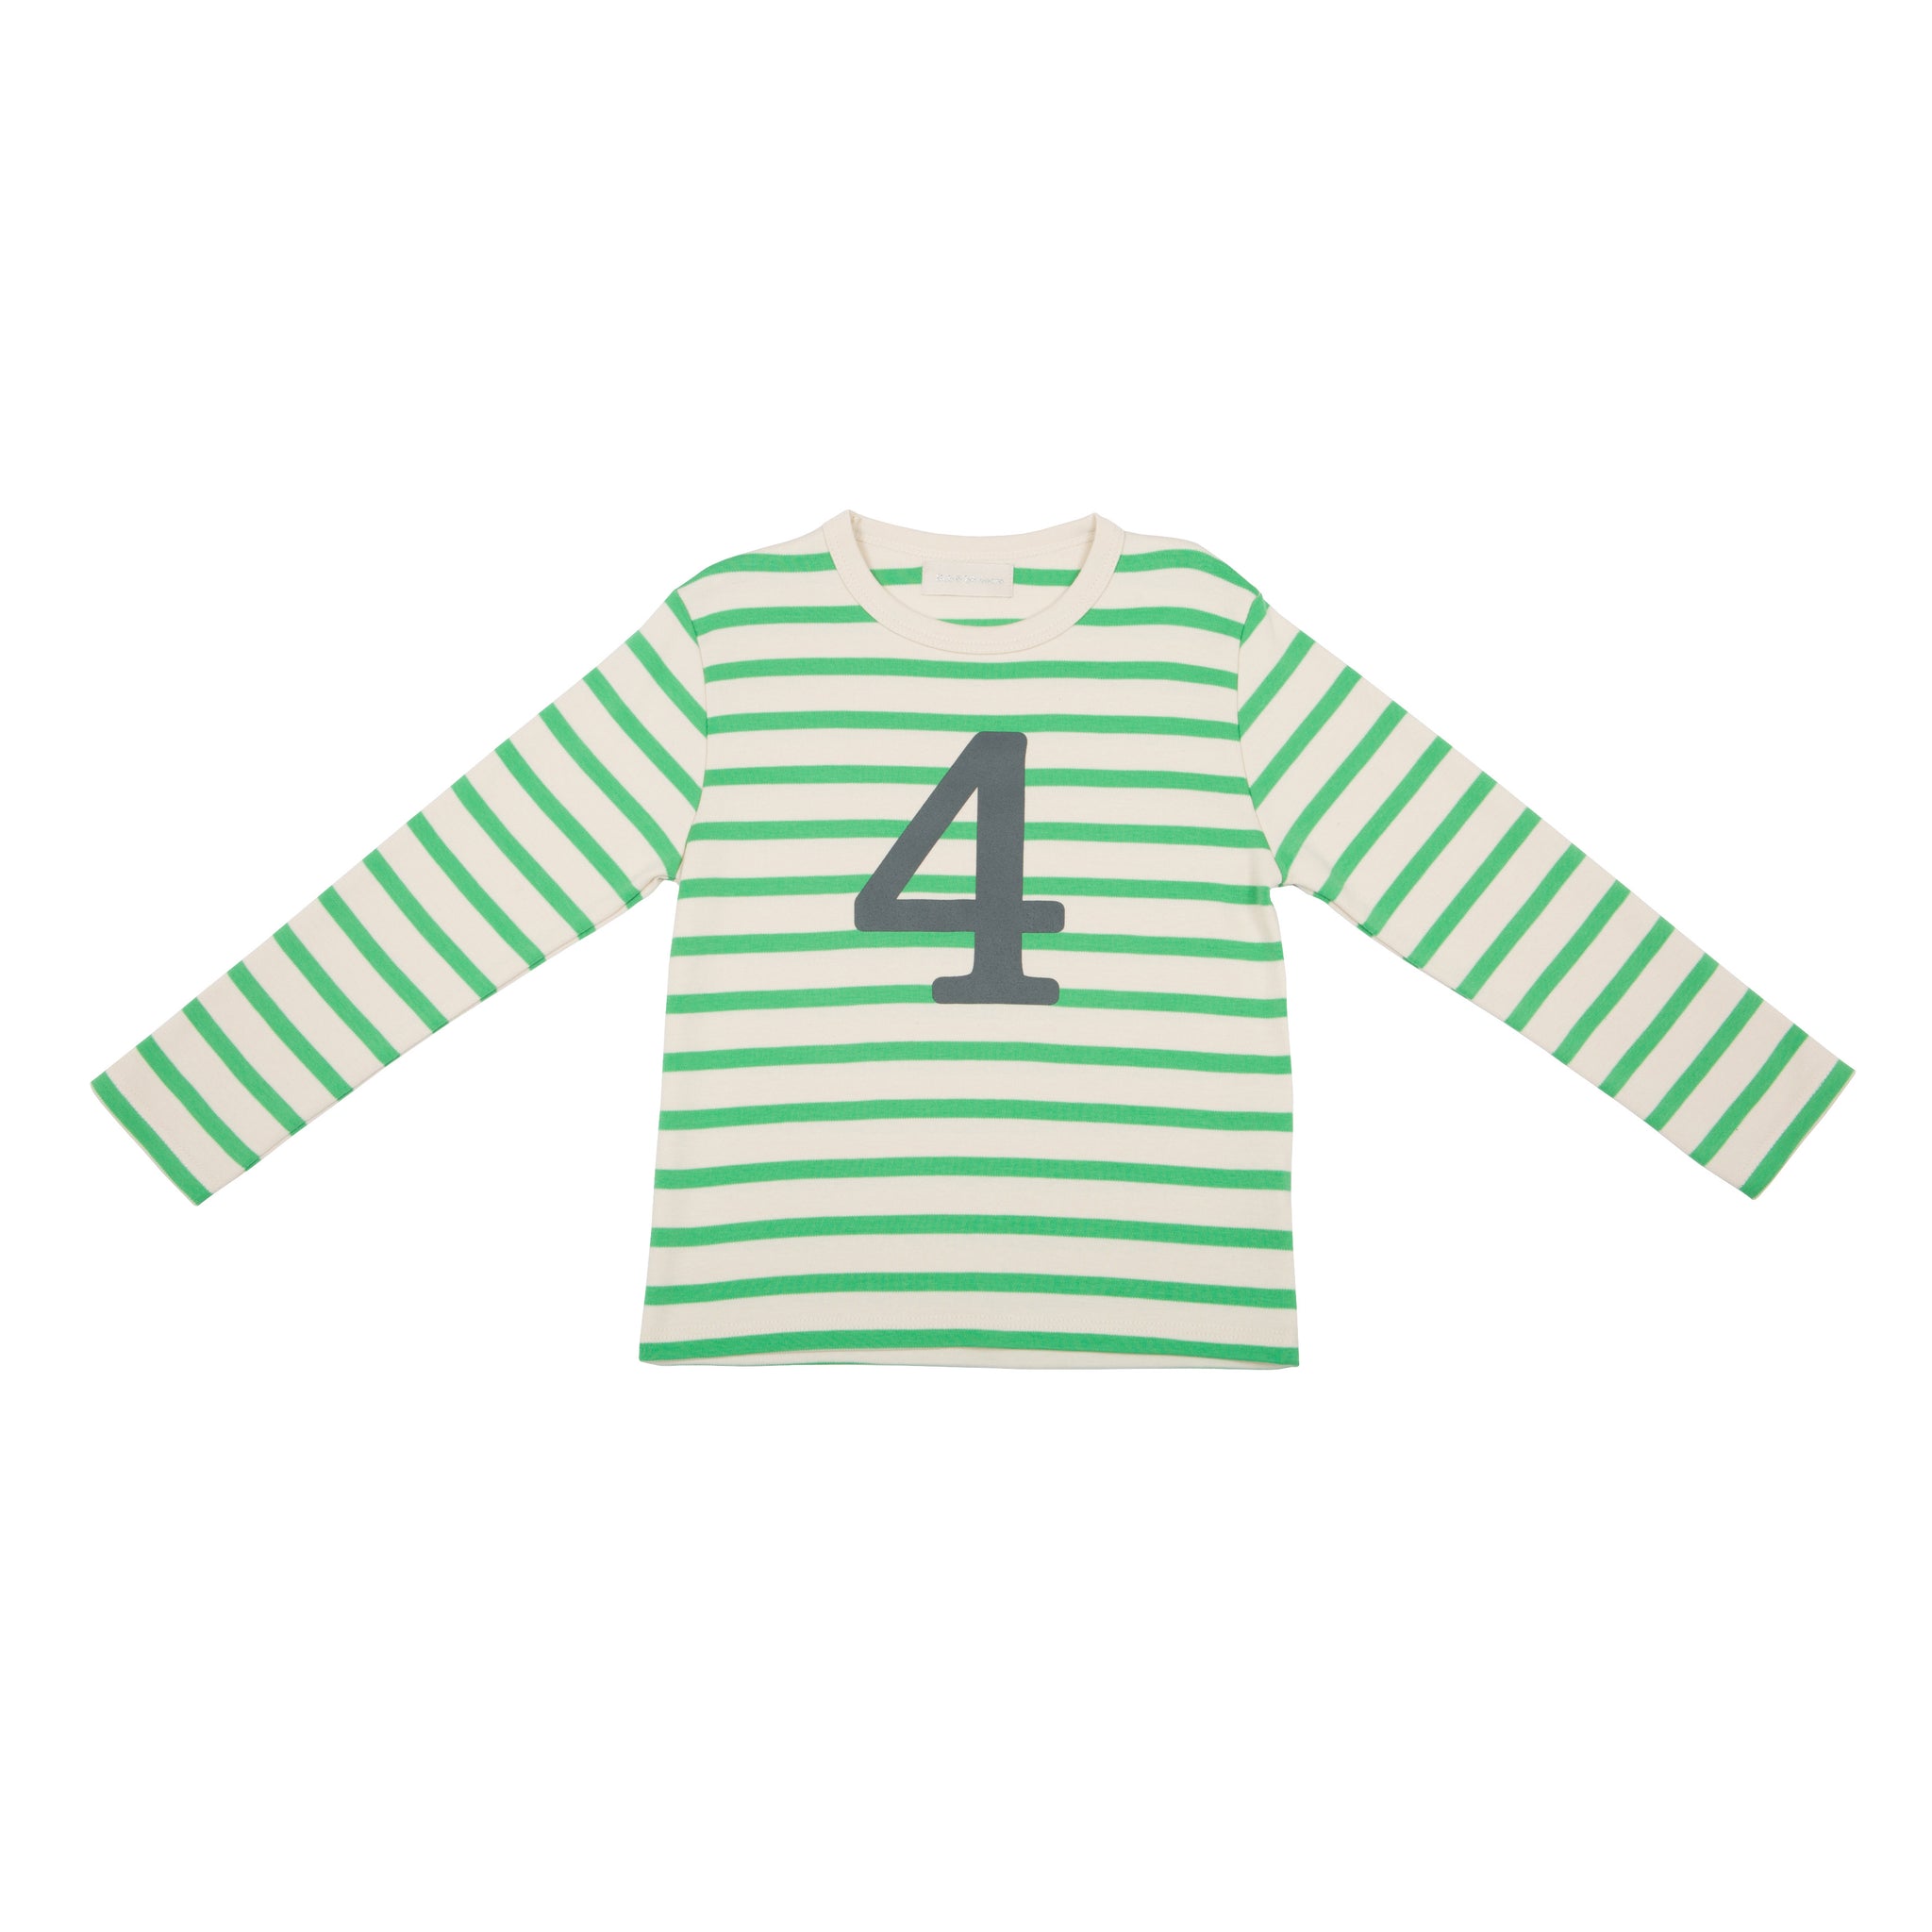 Striped Number T Shirt - Gooseberry & Cream 4-5 Years